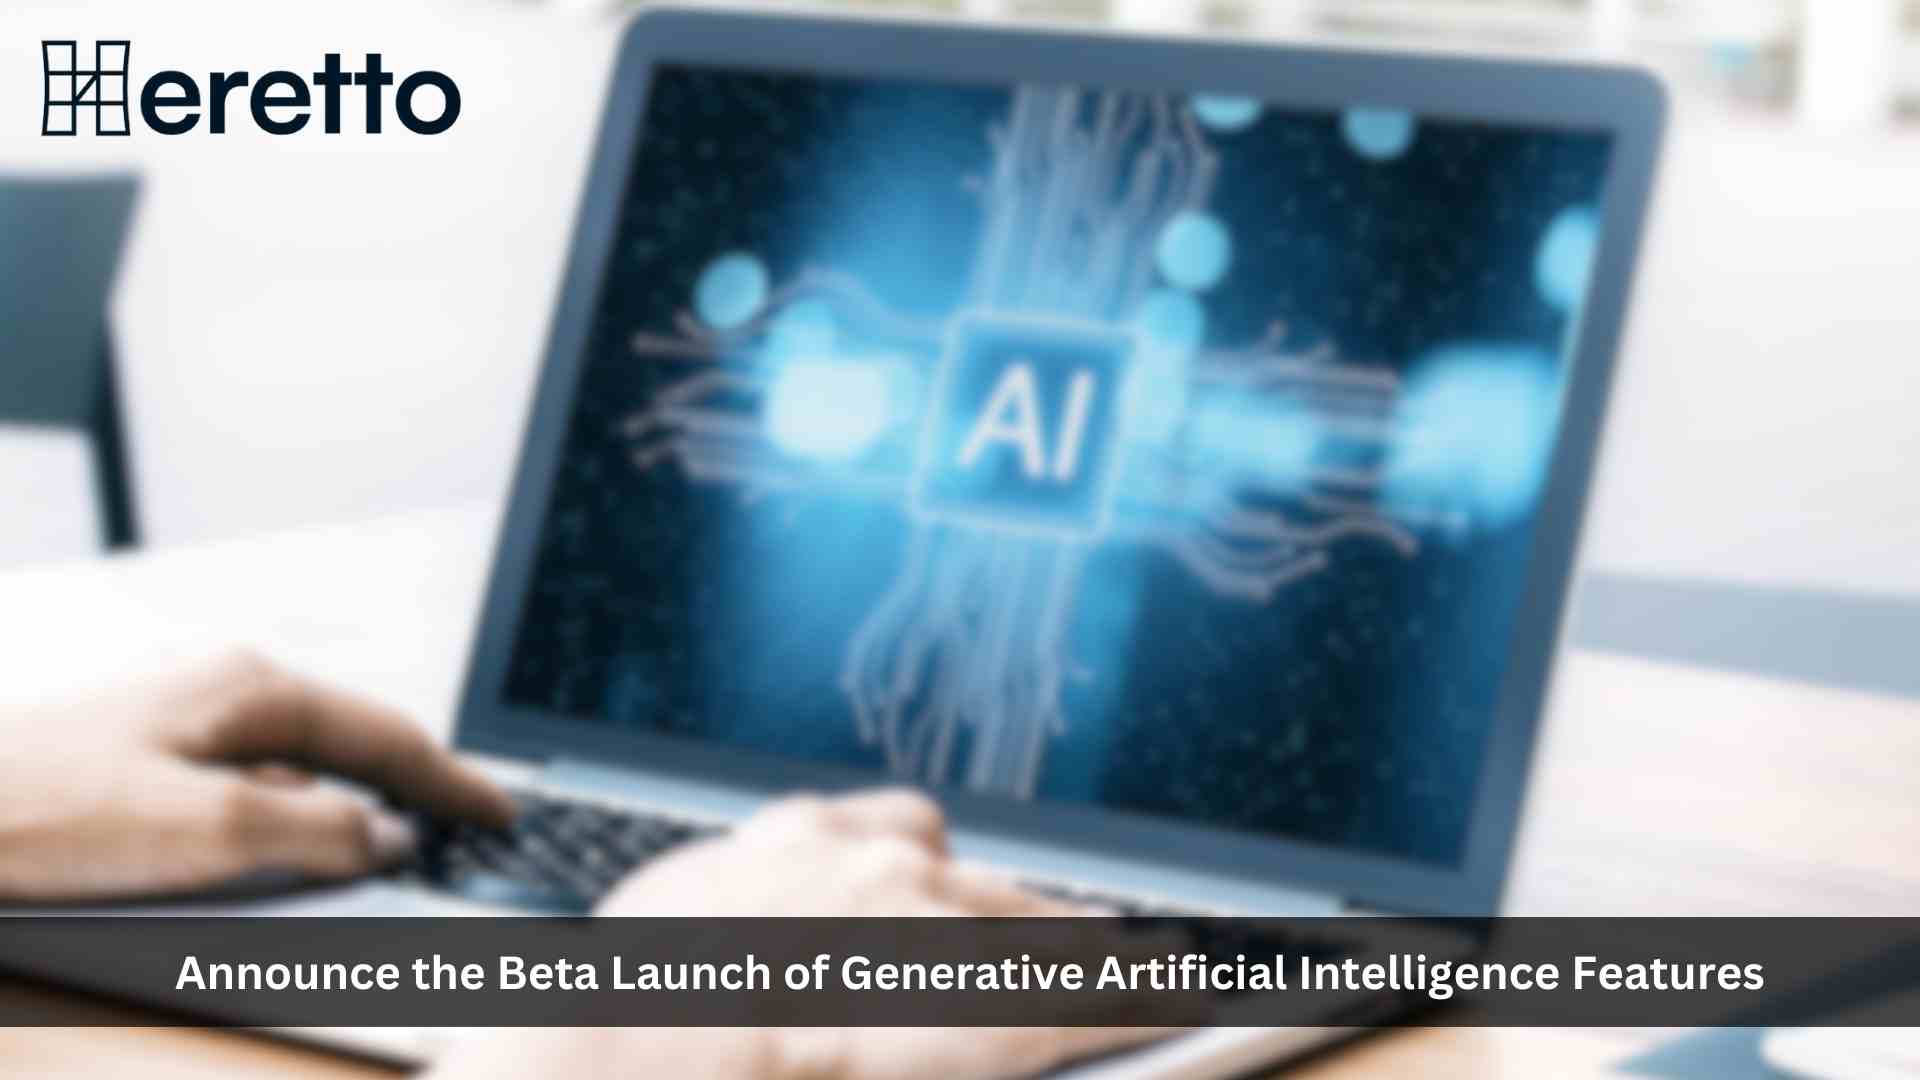 Heretto Steps Into A New Era With Groundbreaking AI Features and Fresh Rebranding